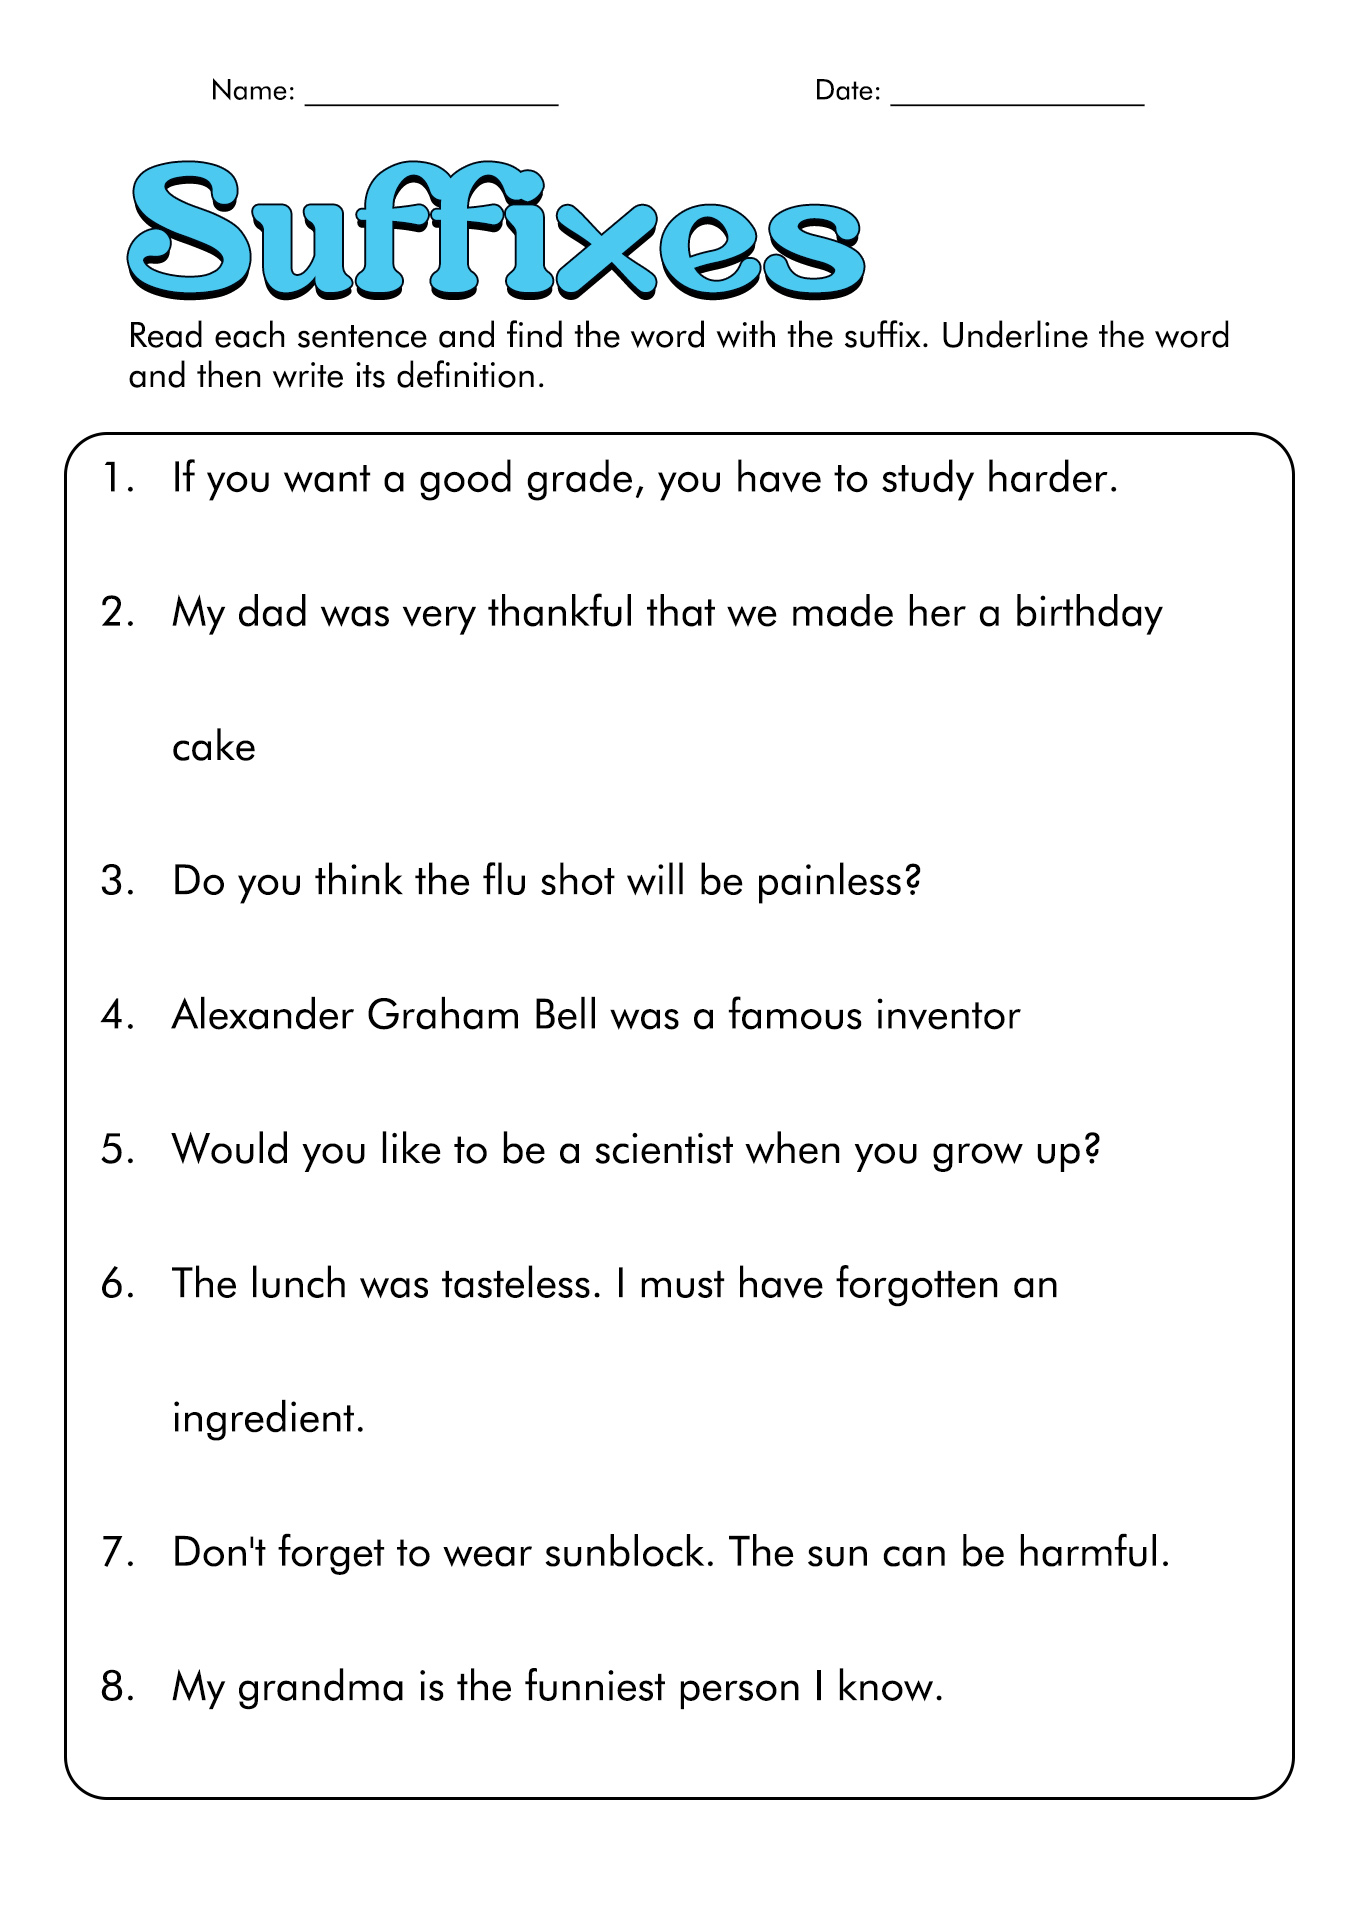 suffixes-worksheets